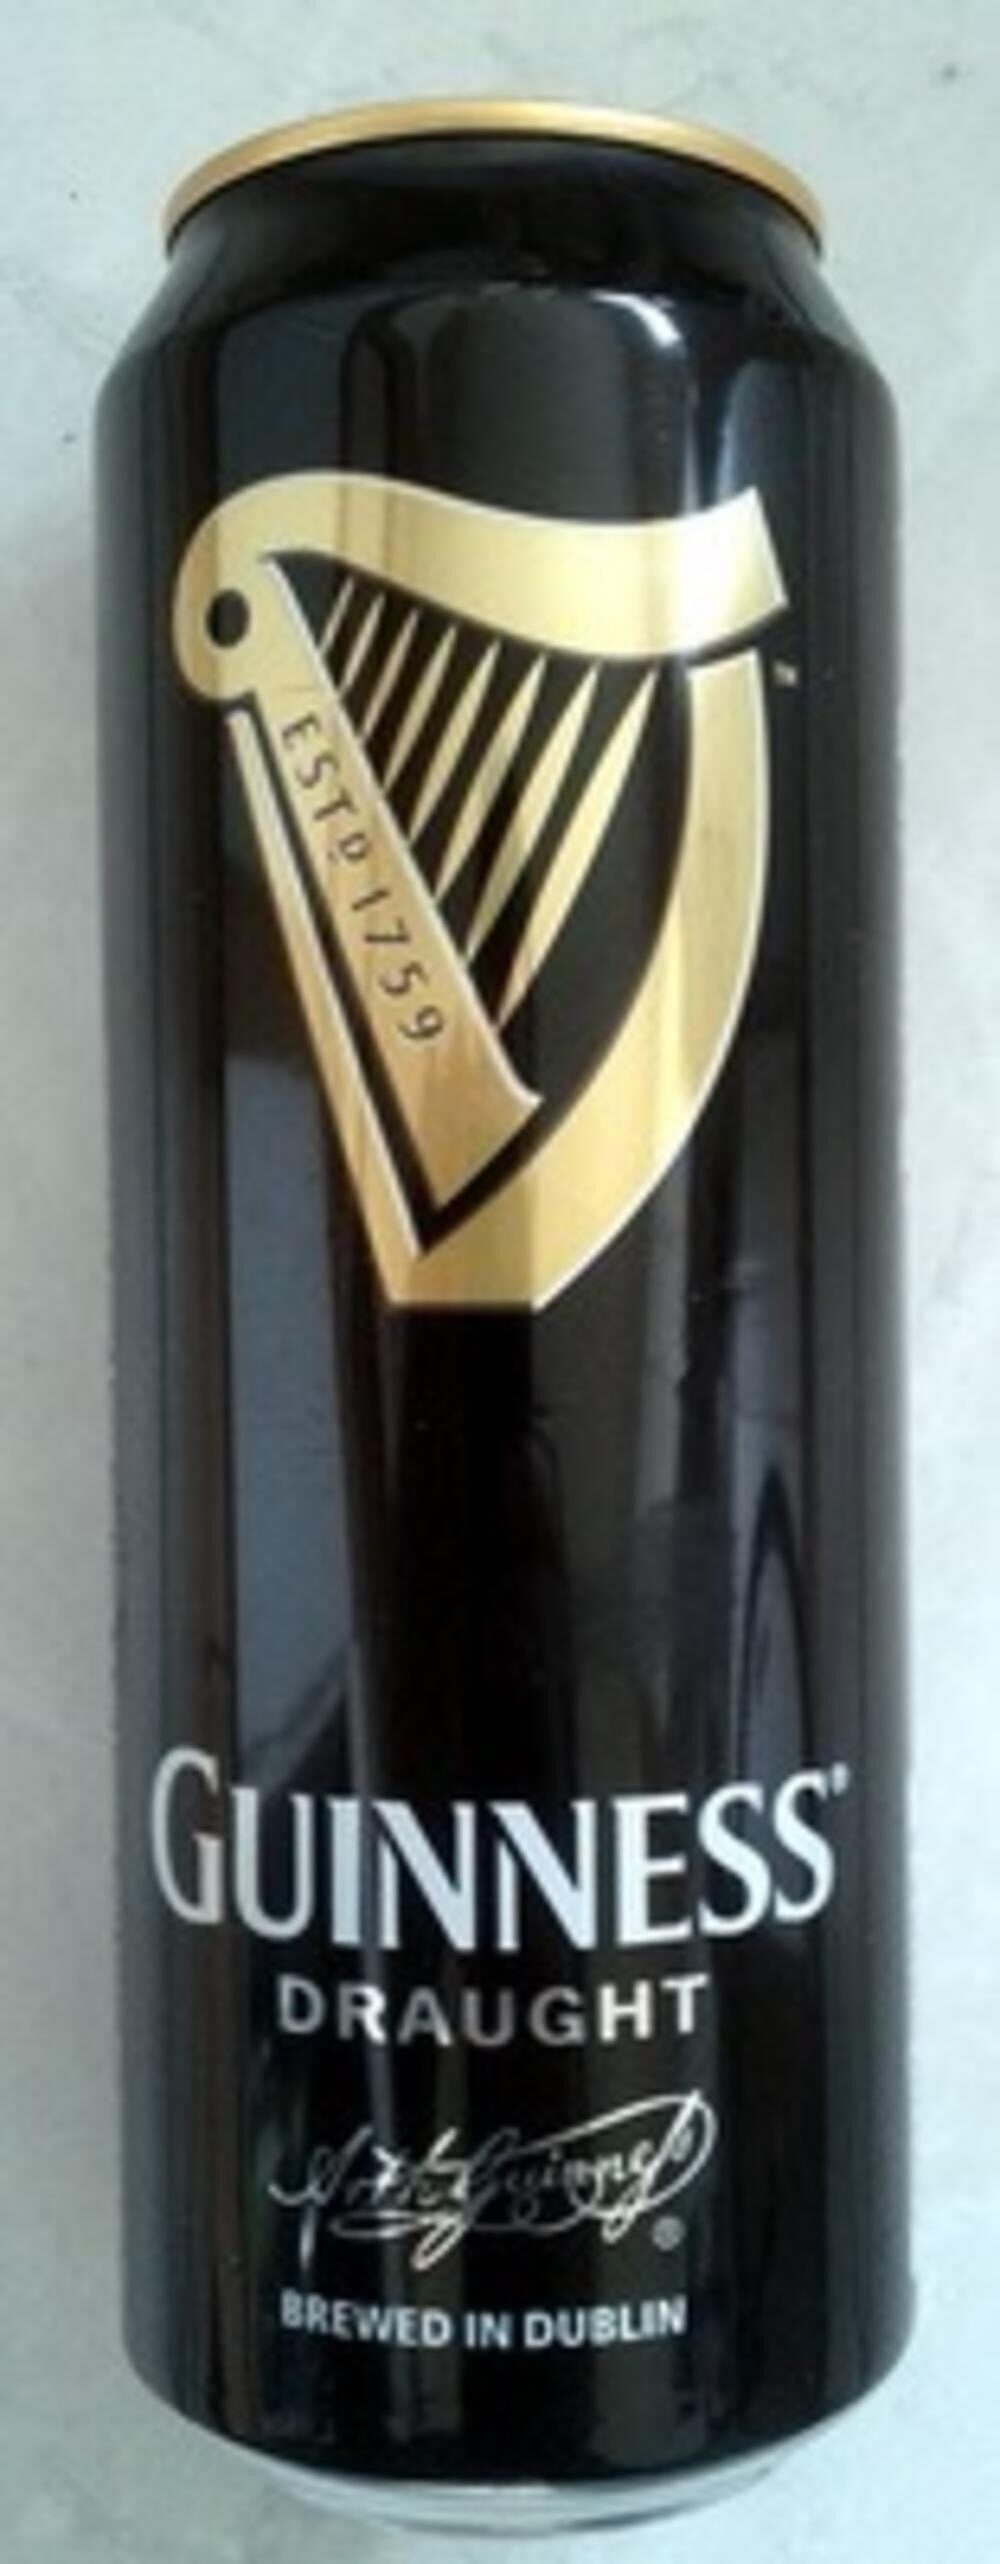 Guinness Draught Brewed in Dublin - Prodotto - fr